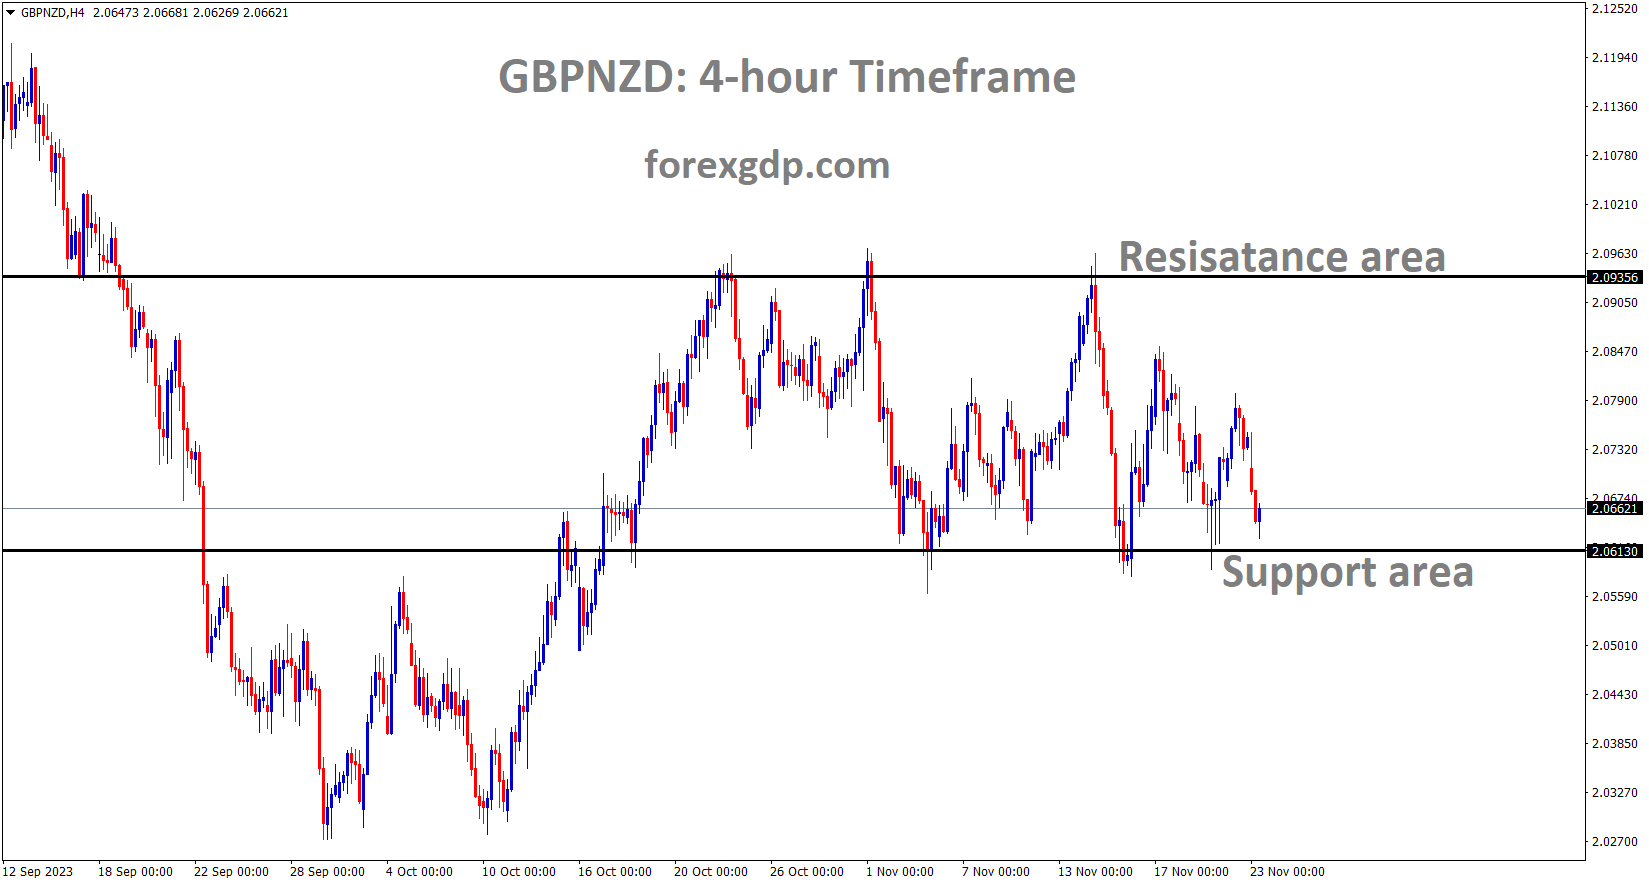 GBPNZD is moving in the Box pattern and the market has reached the support area of the pattern